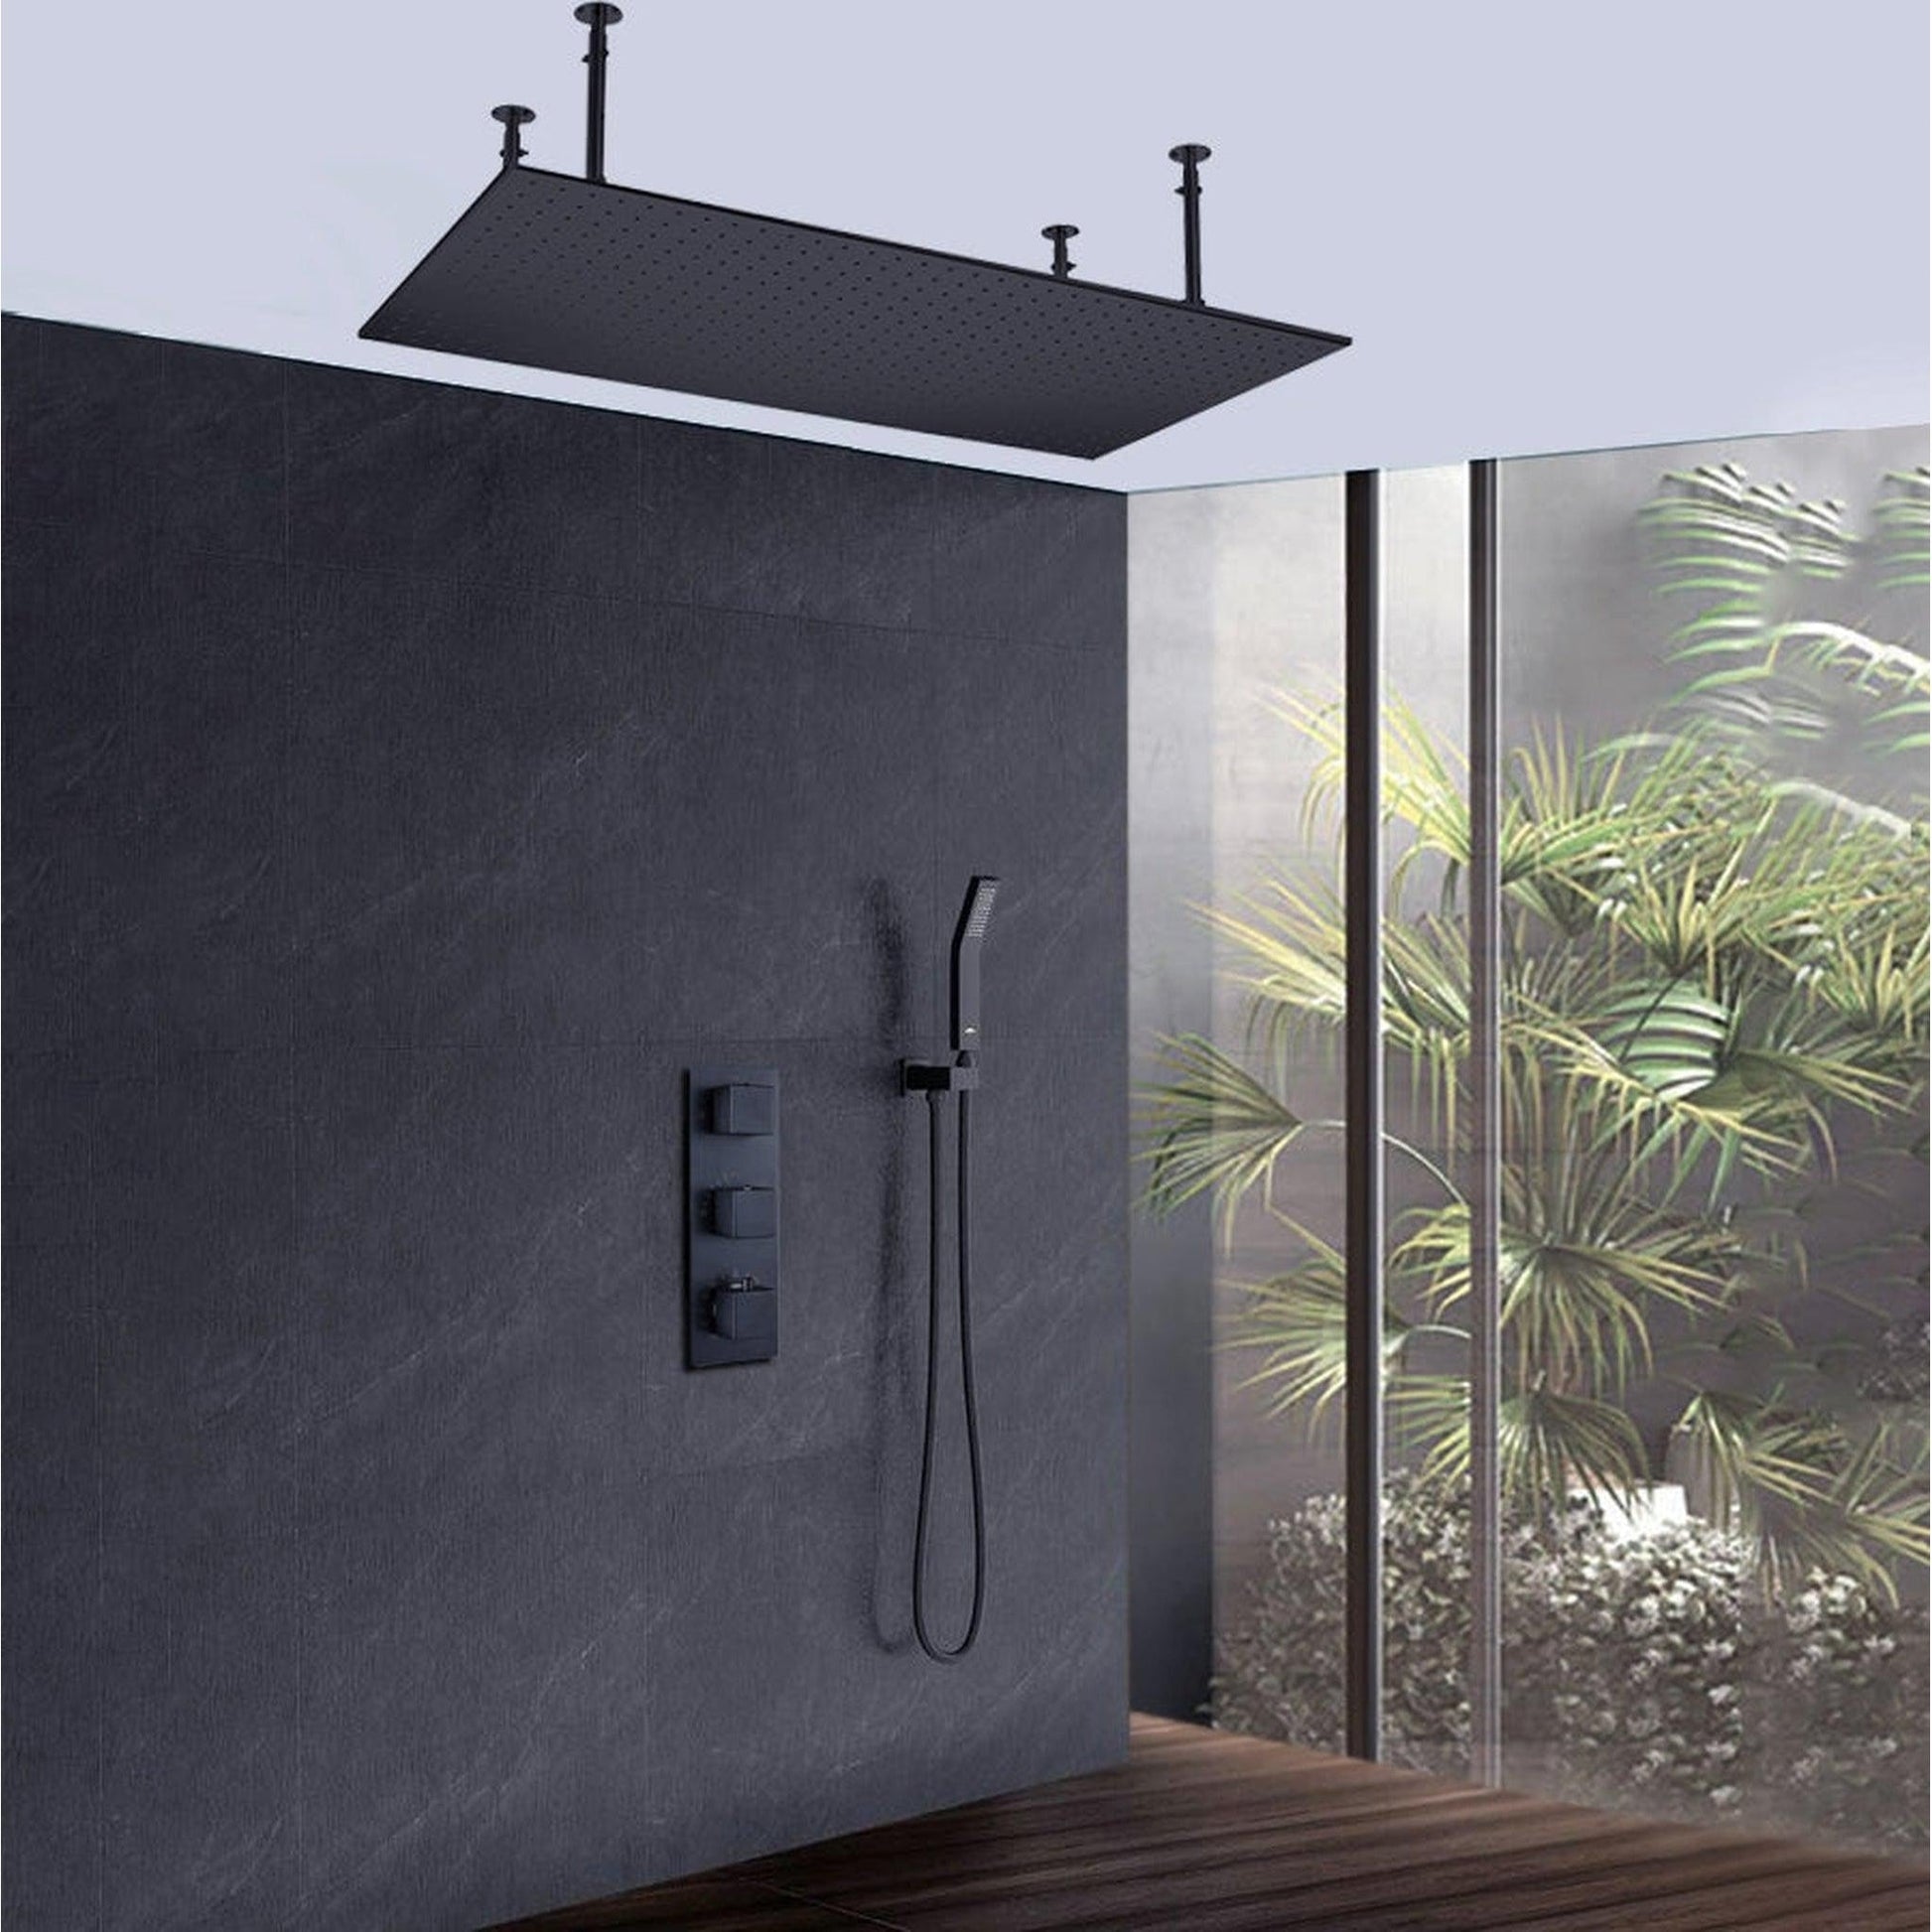 Fontana Martinique Creative Luxury Large Matte Black Rectangular Ceiling Mounted LED Solid Brass Shower Head Rain Shower System With Hand Shower